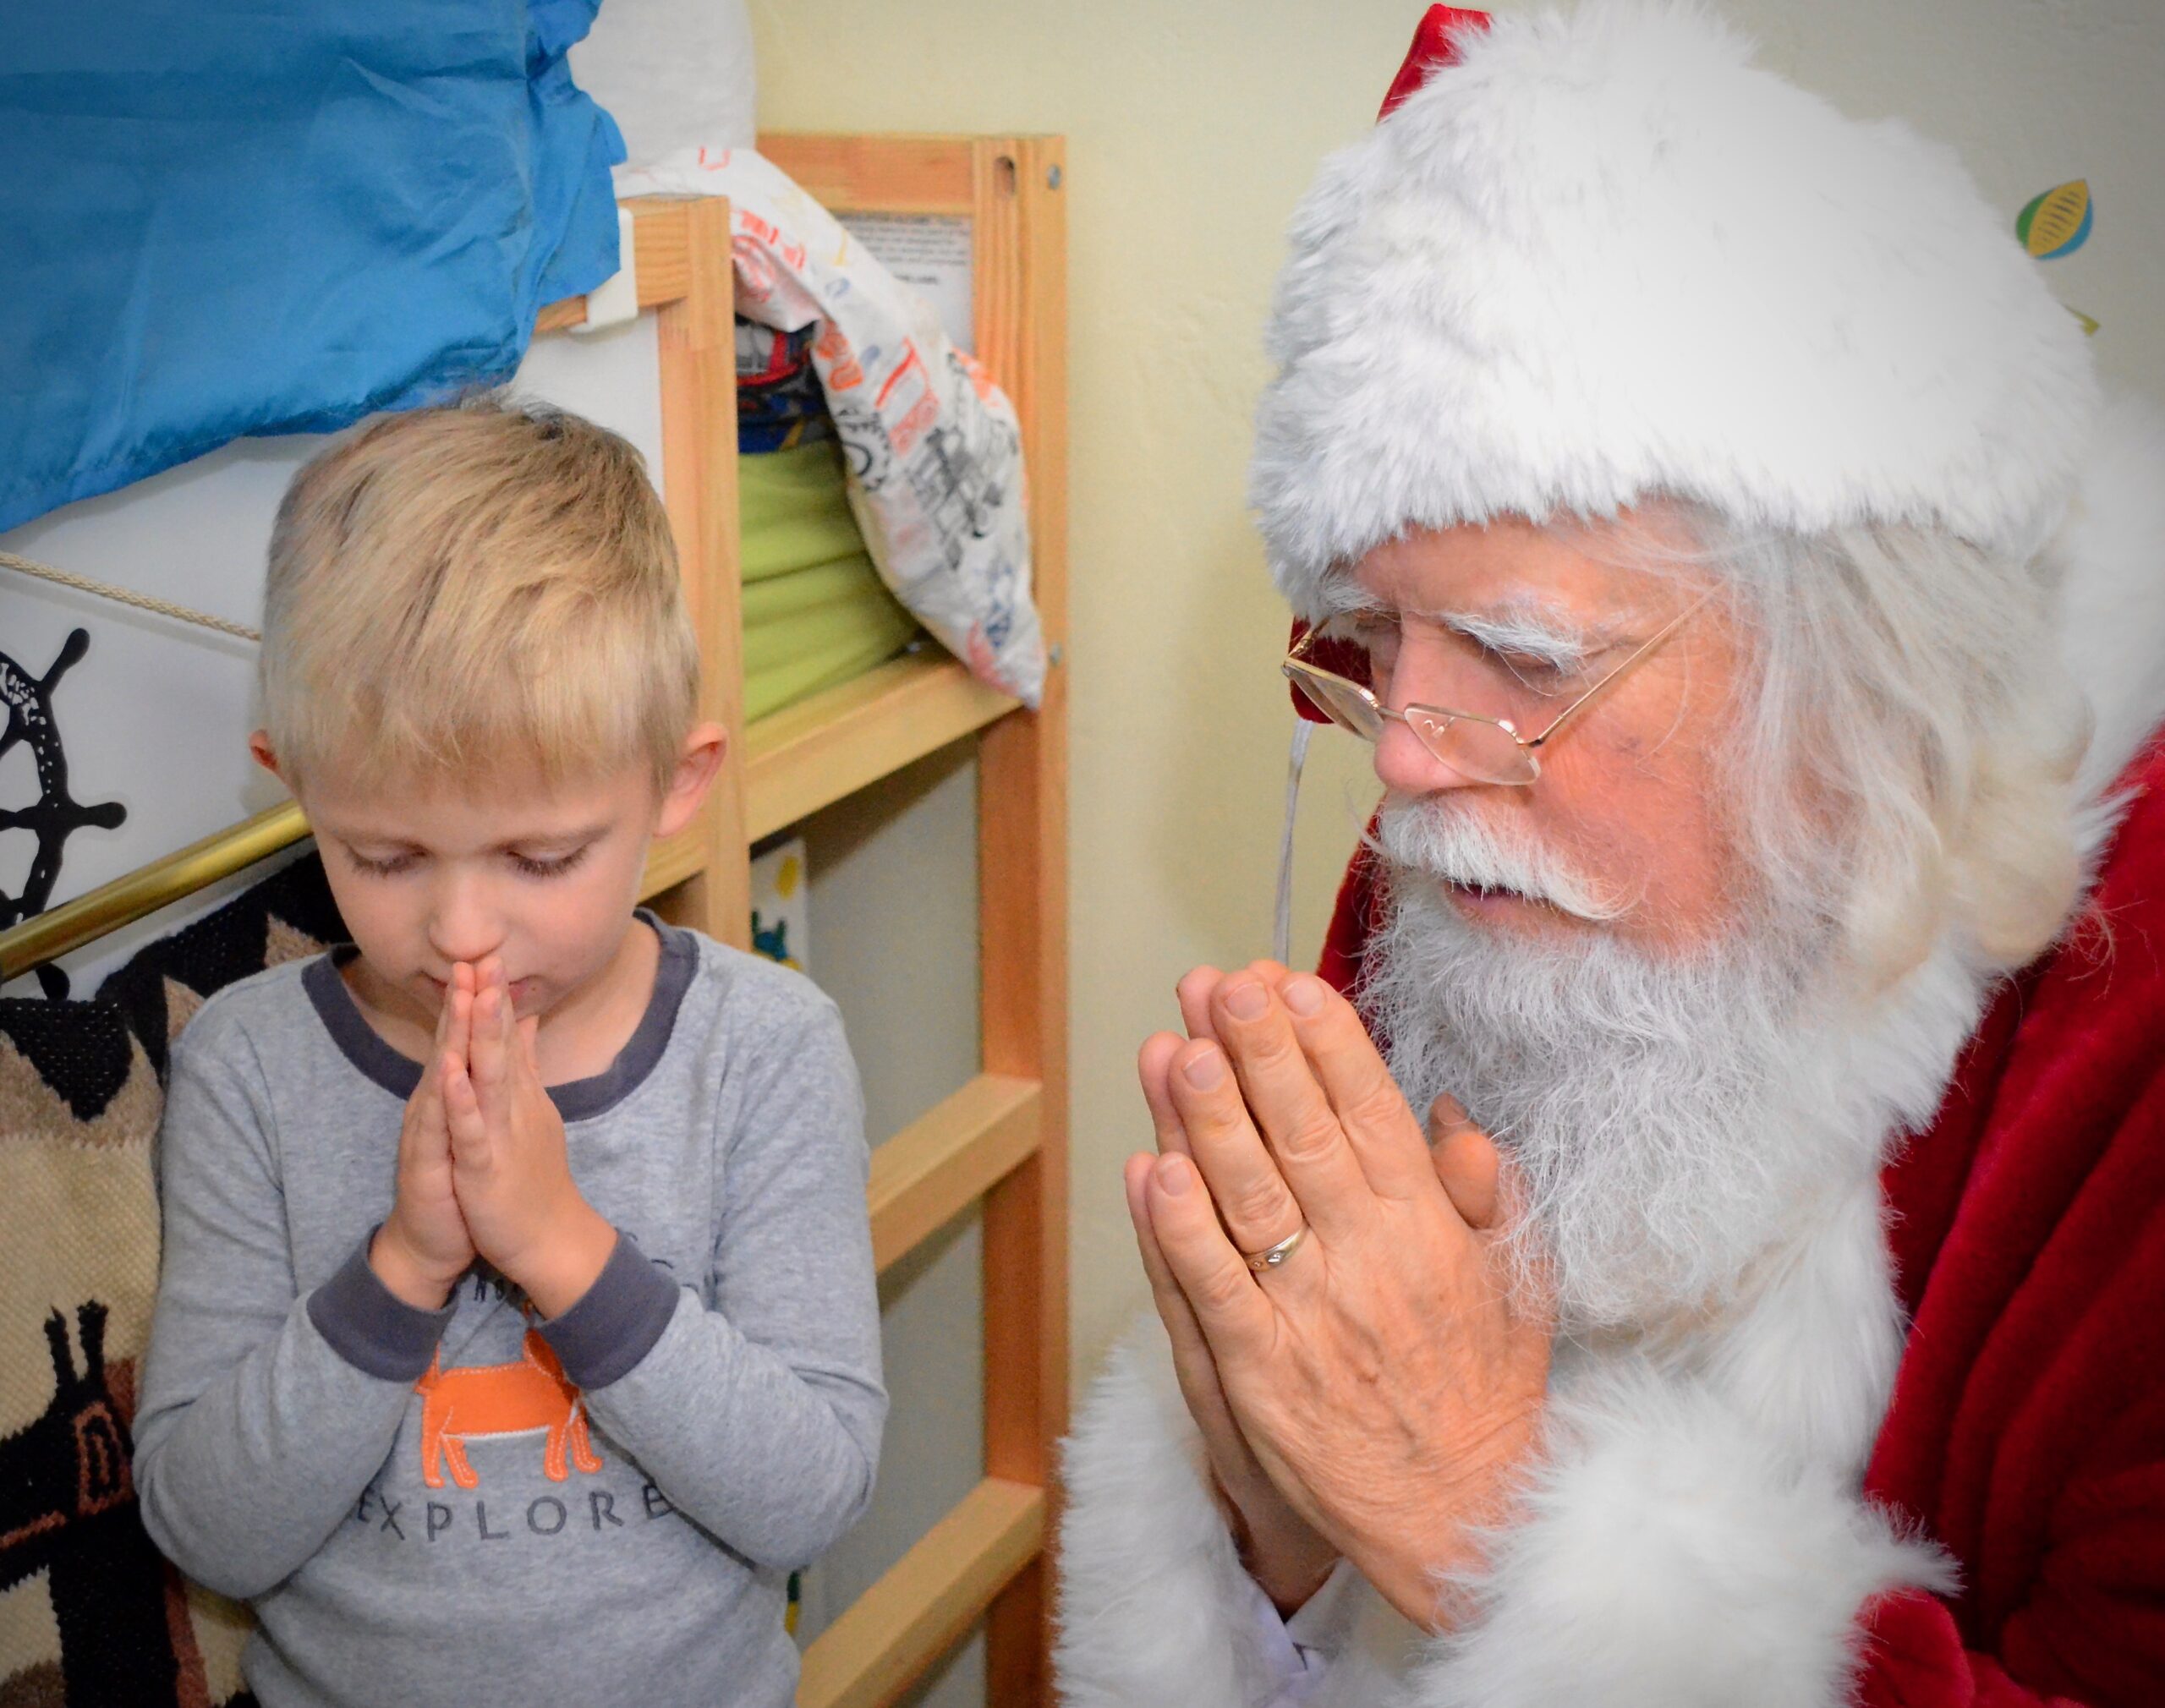 Santa praying with young child